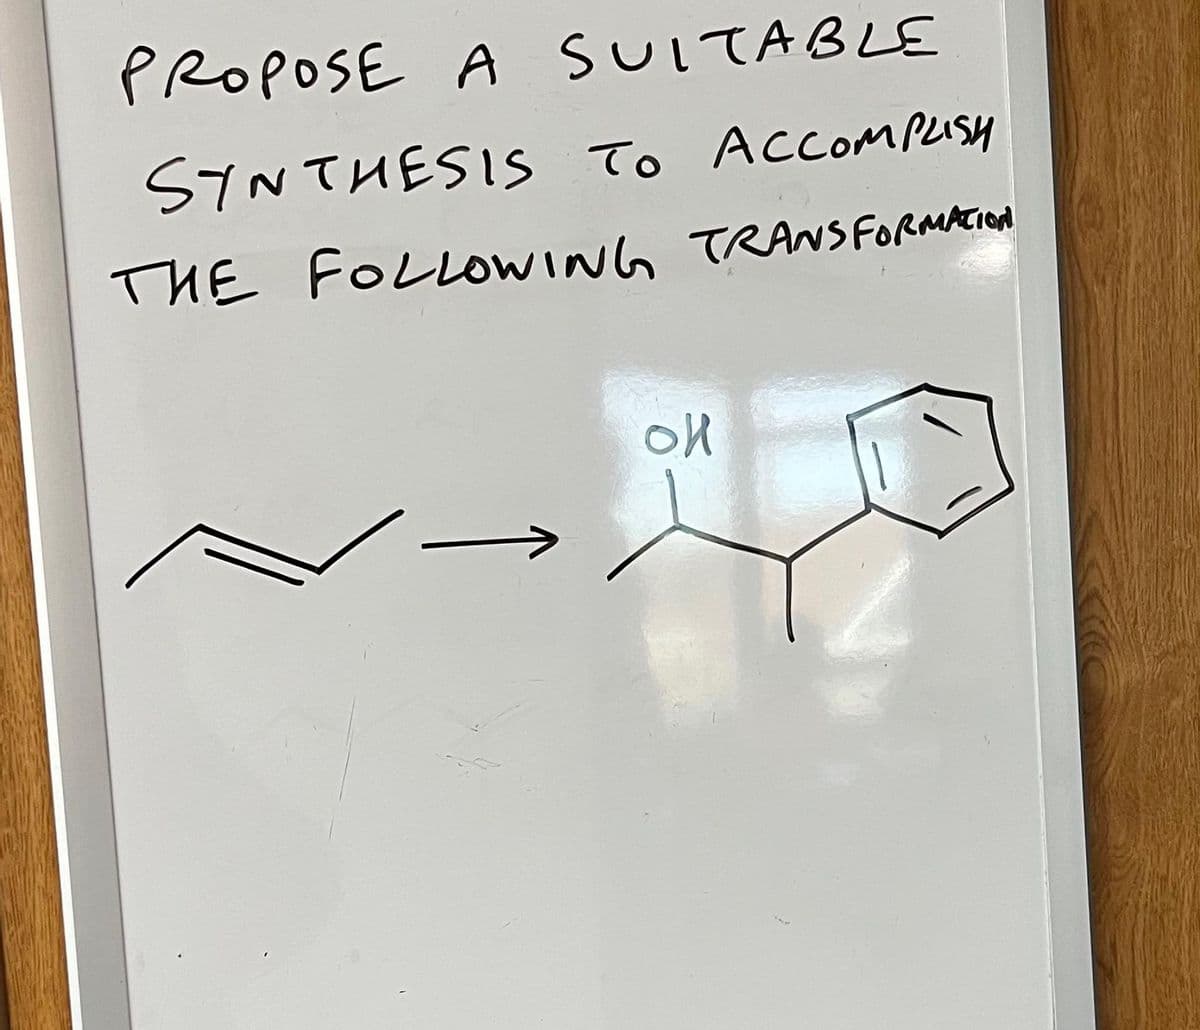 PROPOSE A SUITABLE
SYNTHESIS TO ACCOMPLISH
THE FOLLOWING TRANSFORMATION
он